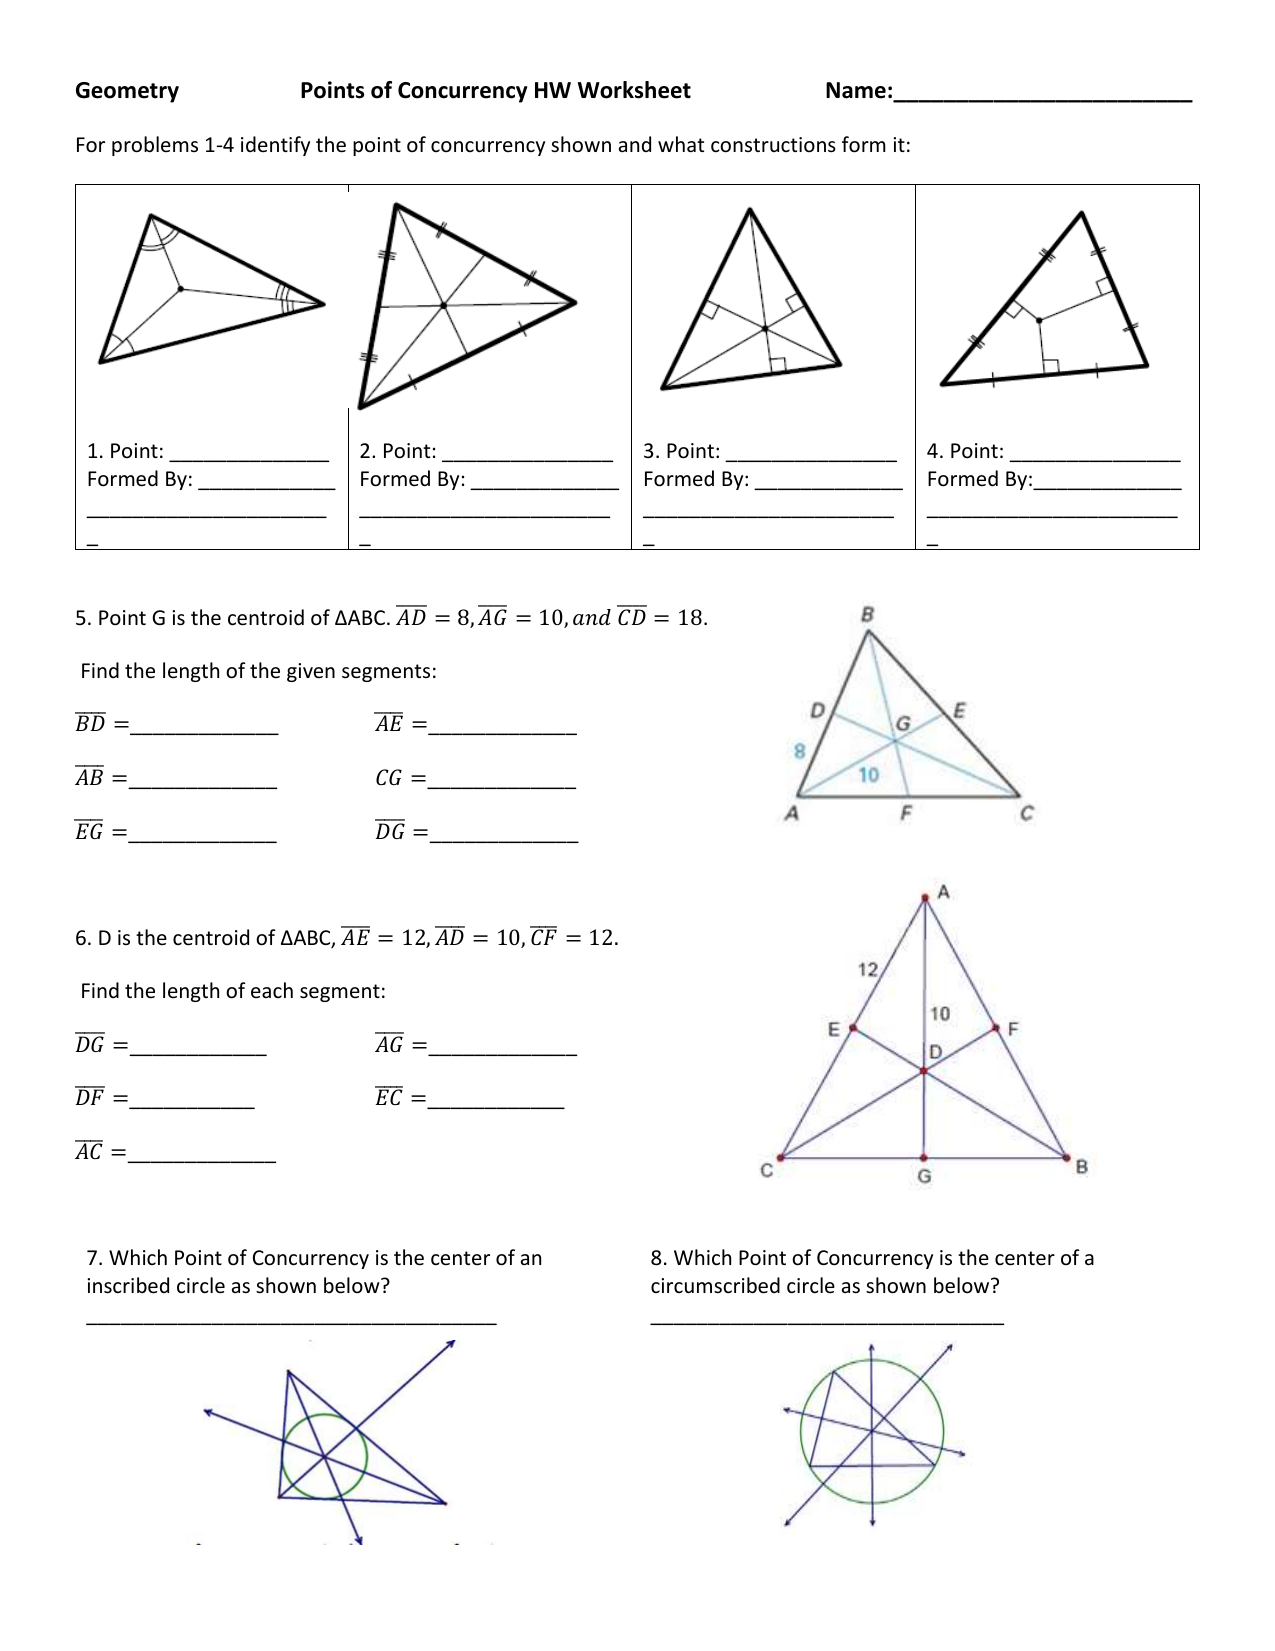 Geometry Points Of Concurrency Worksheet / Geometry Points Of